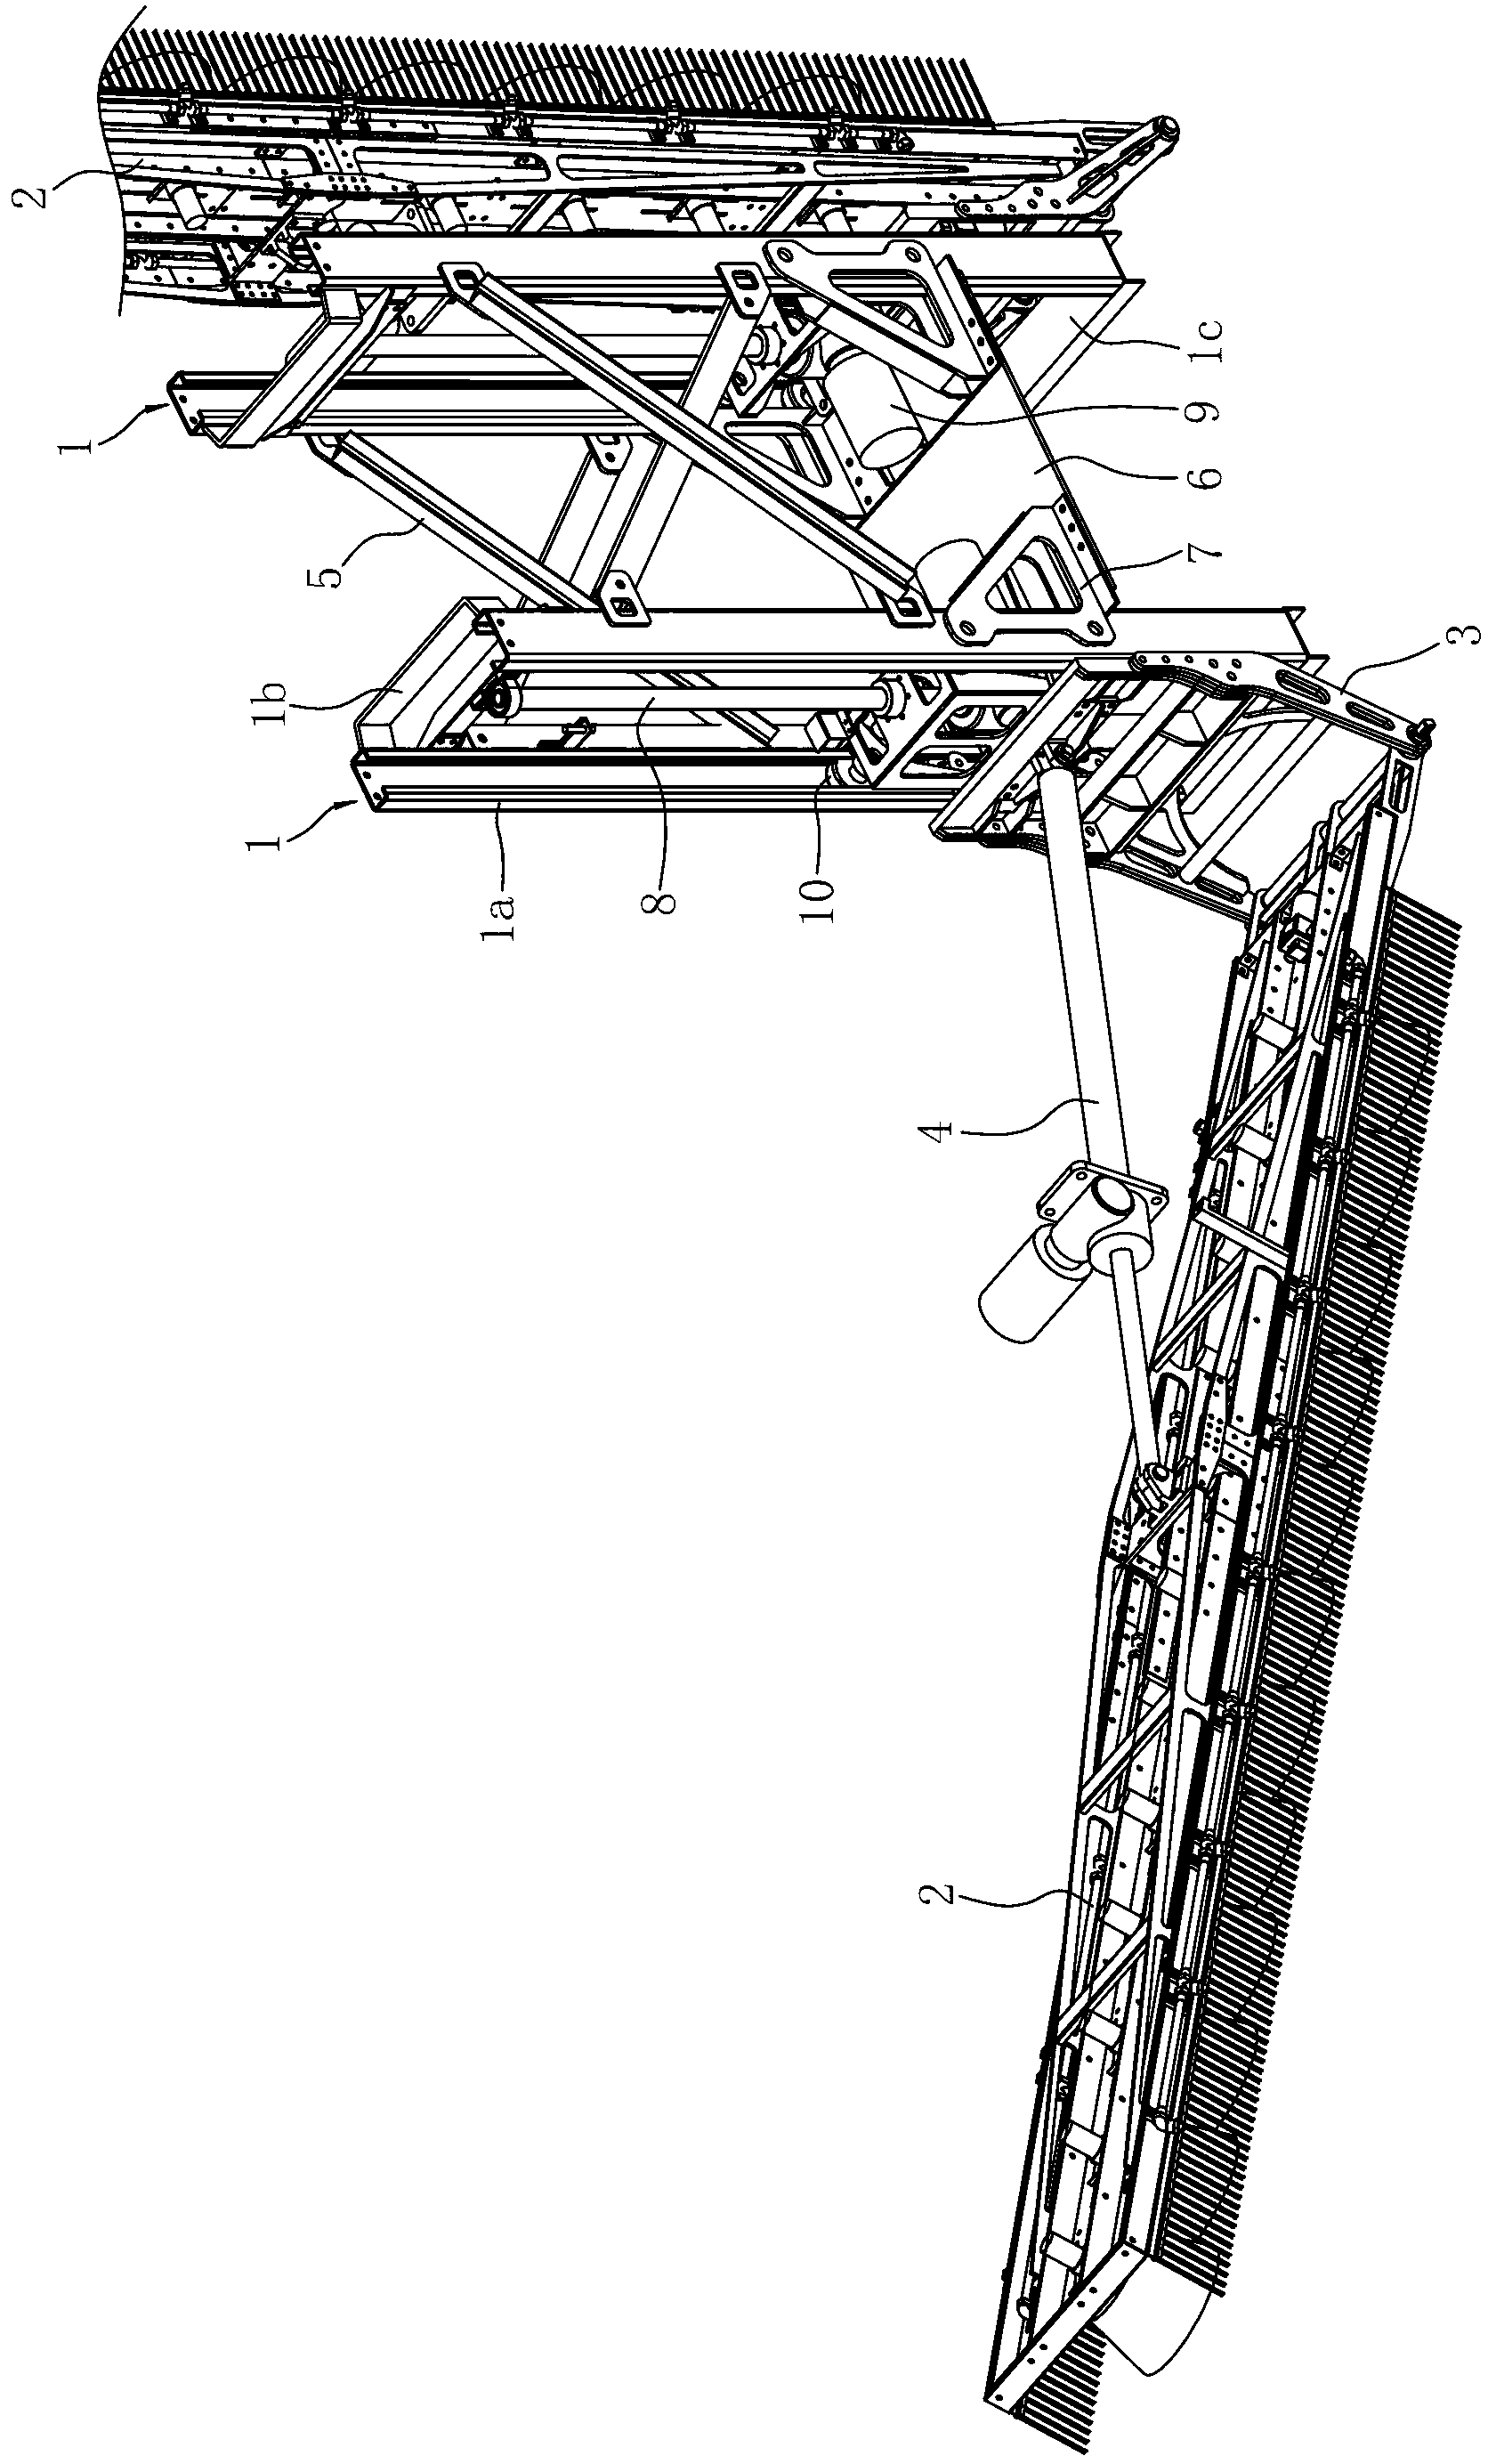 Brushing disc positioning mechanism of vehicle-mounted cleaning system